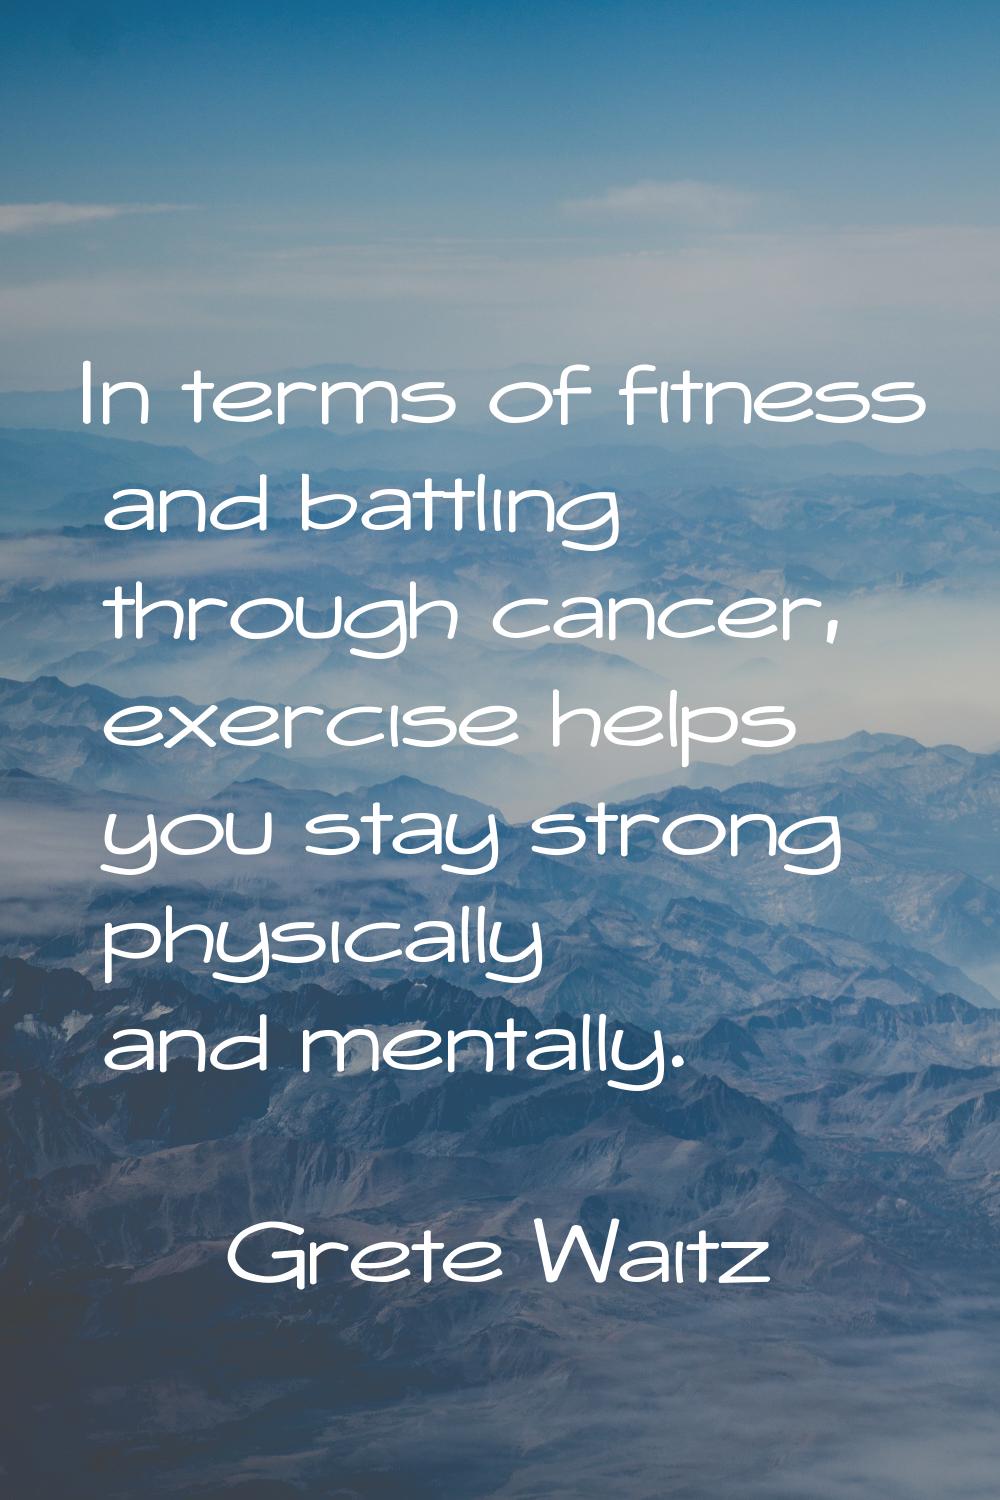 In terms of fitness and battling through cancer, exercise helps you stay strong physically and ment